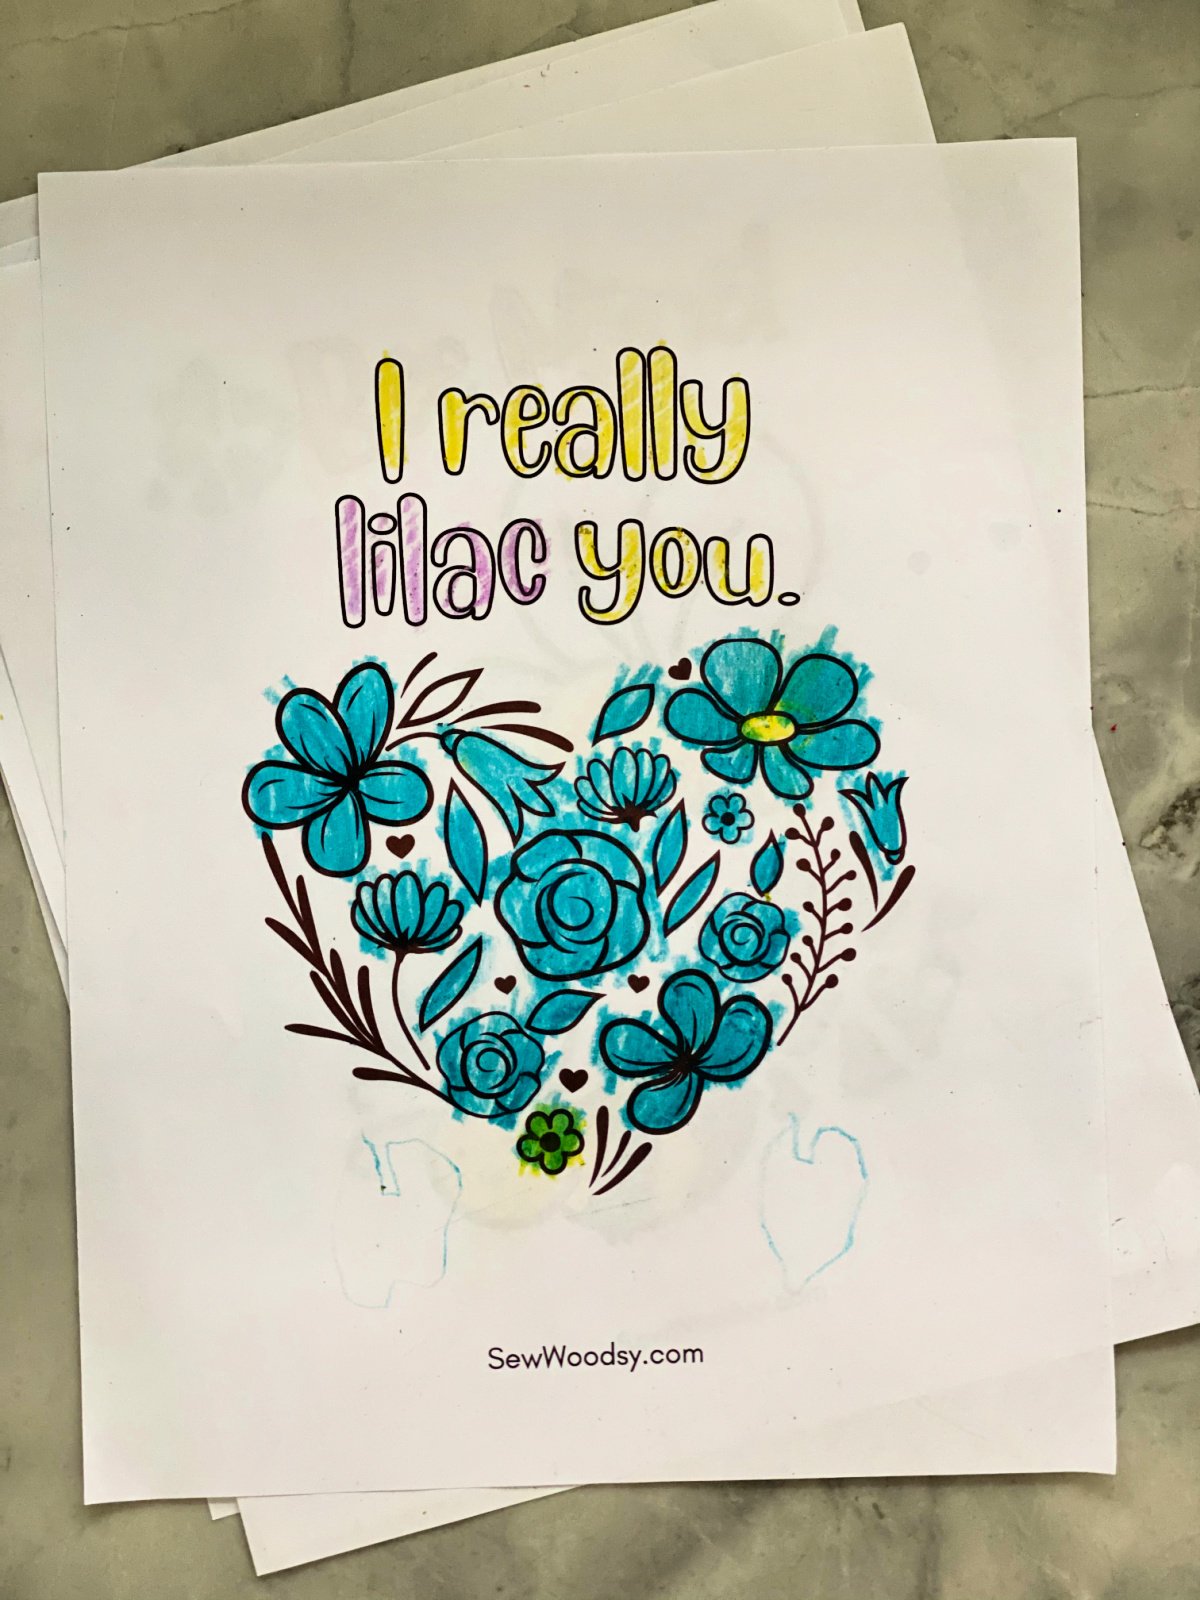 Heart shaped by flowers on a white paper colored in with the words "I really lilac you."